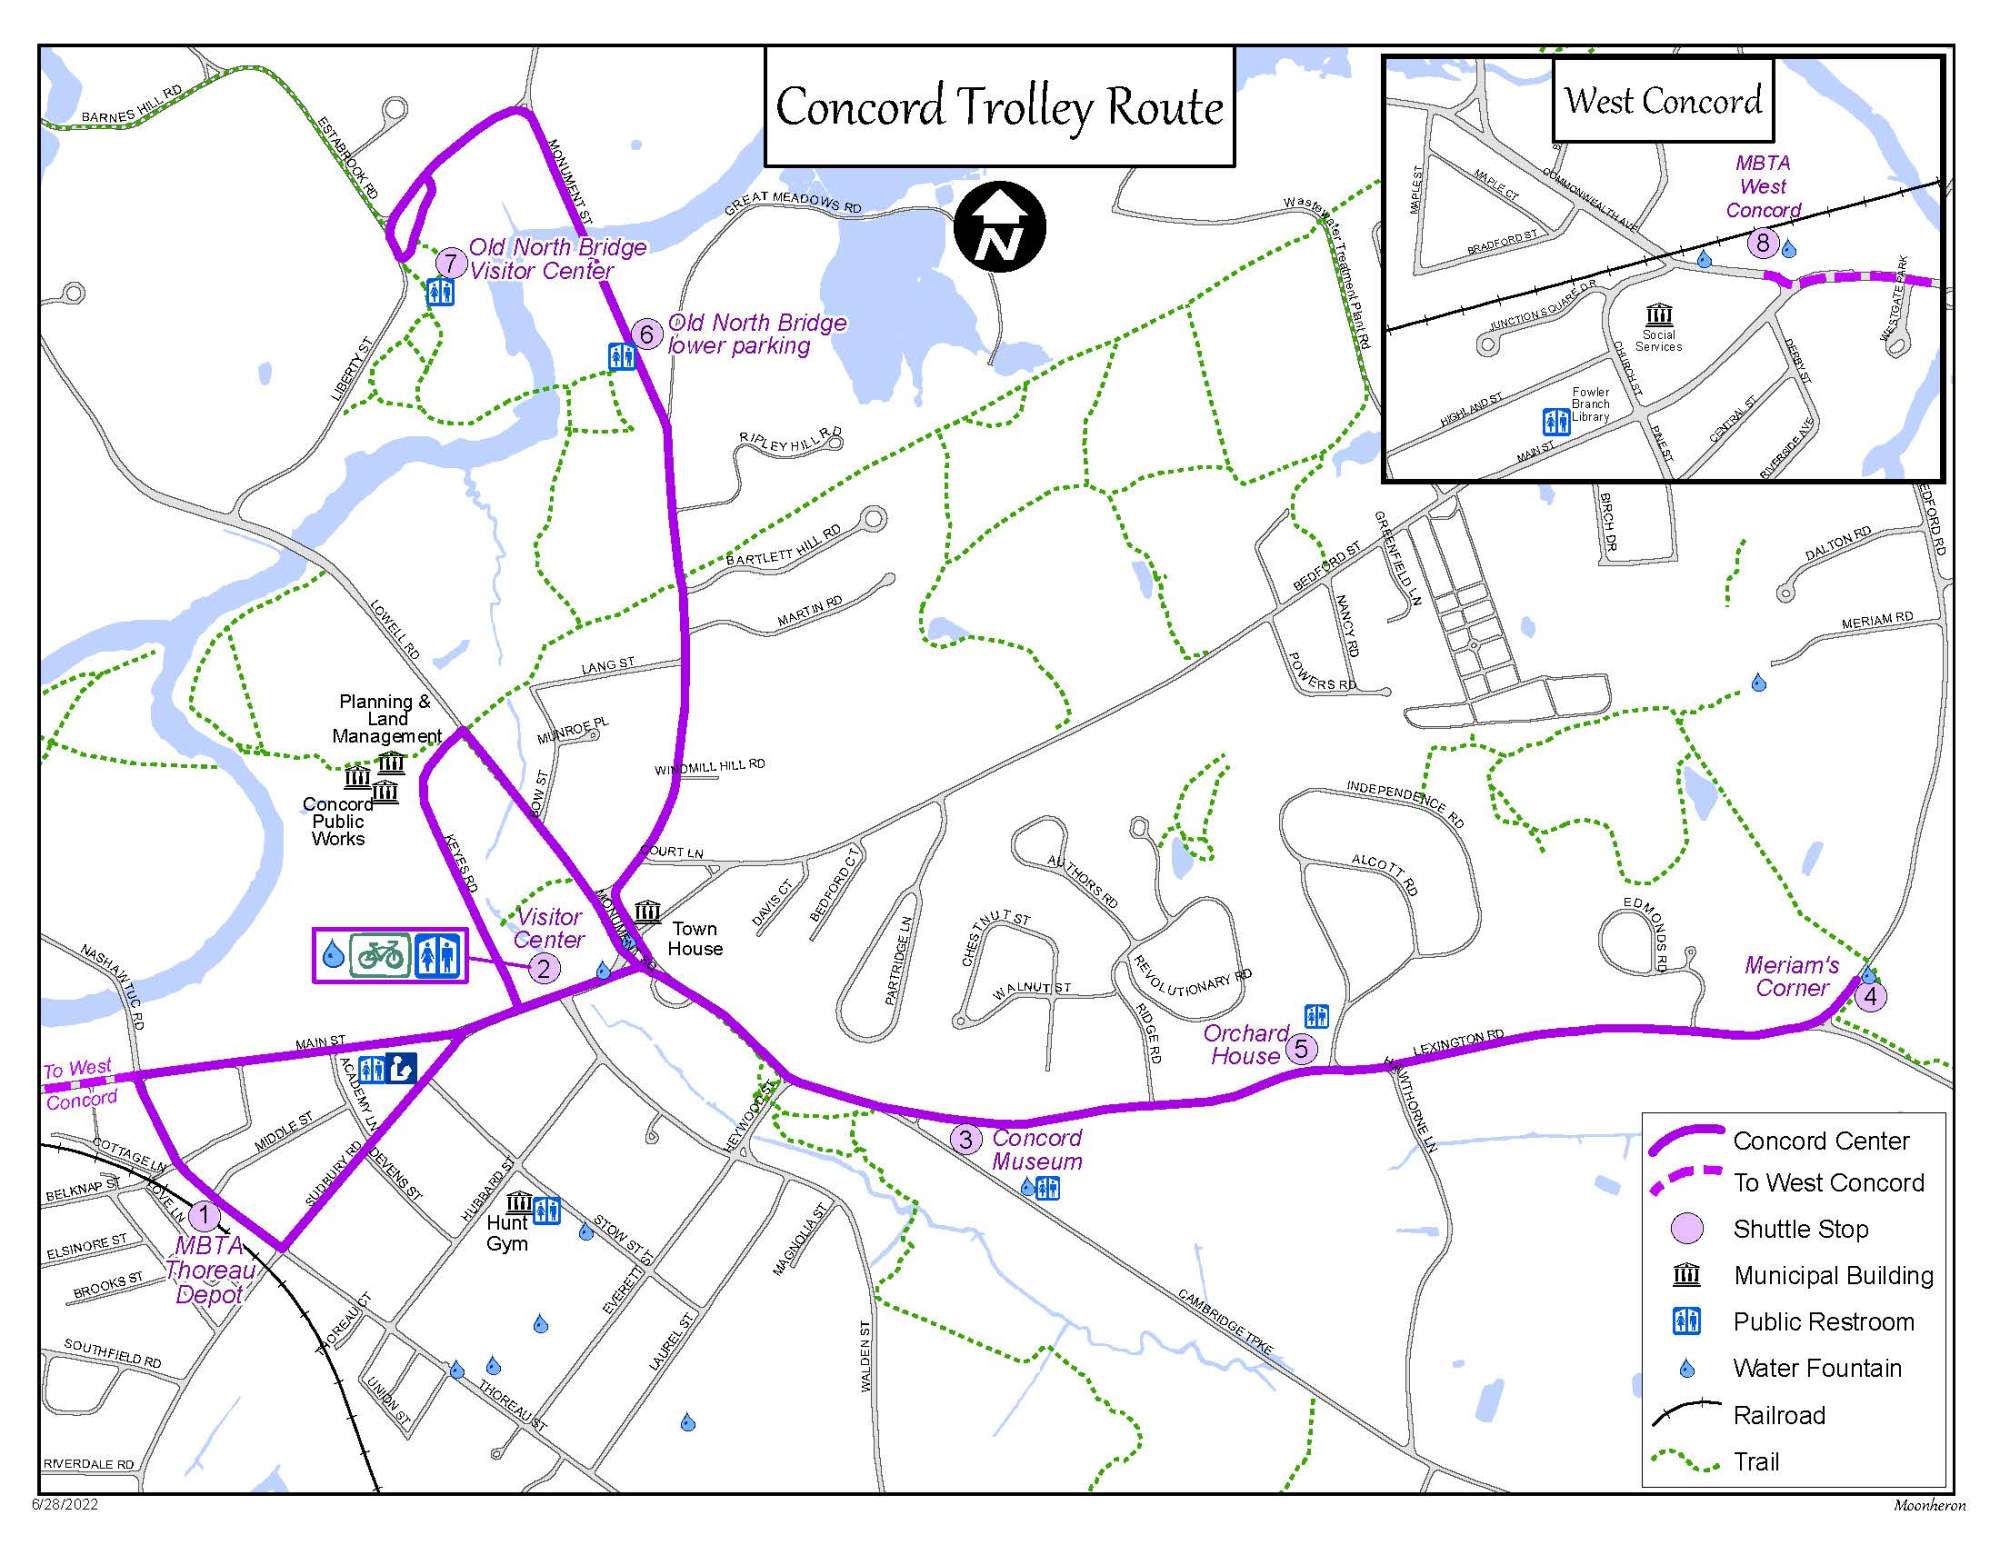 A map of the Concord Trolley Route